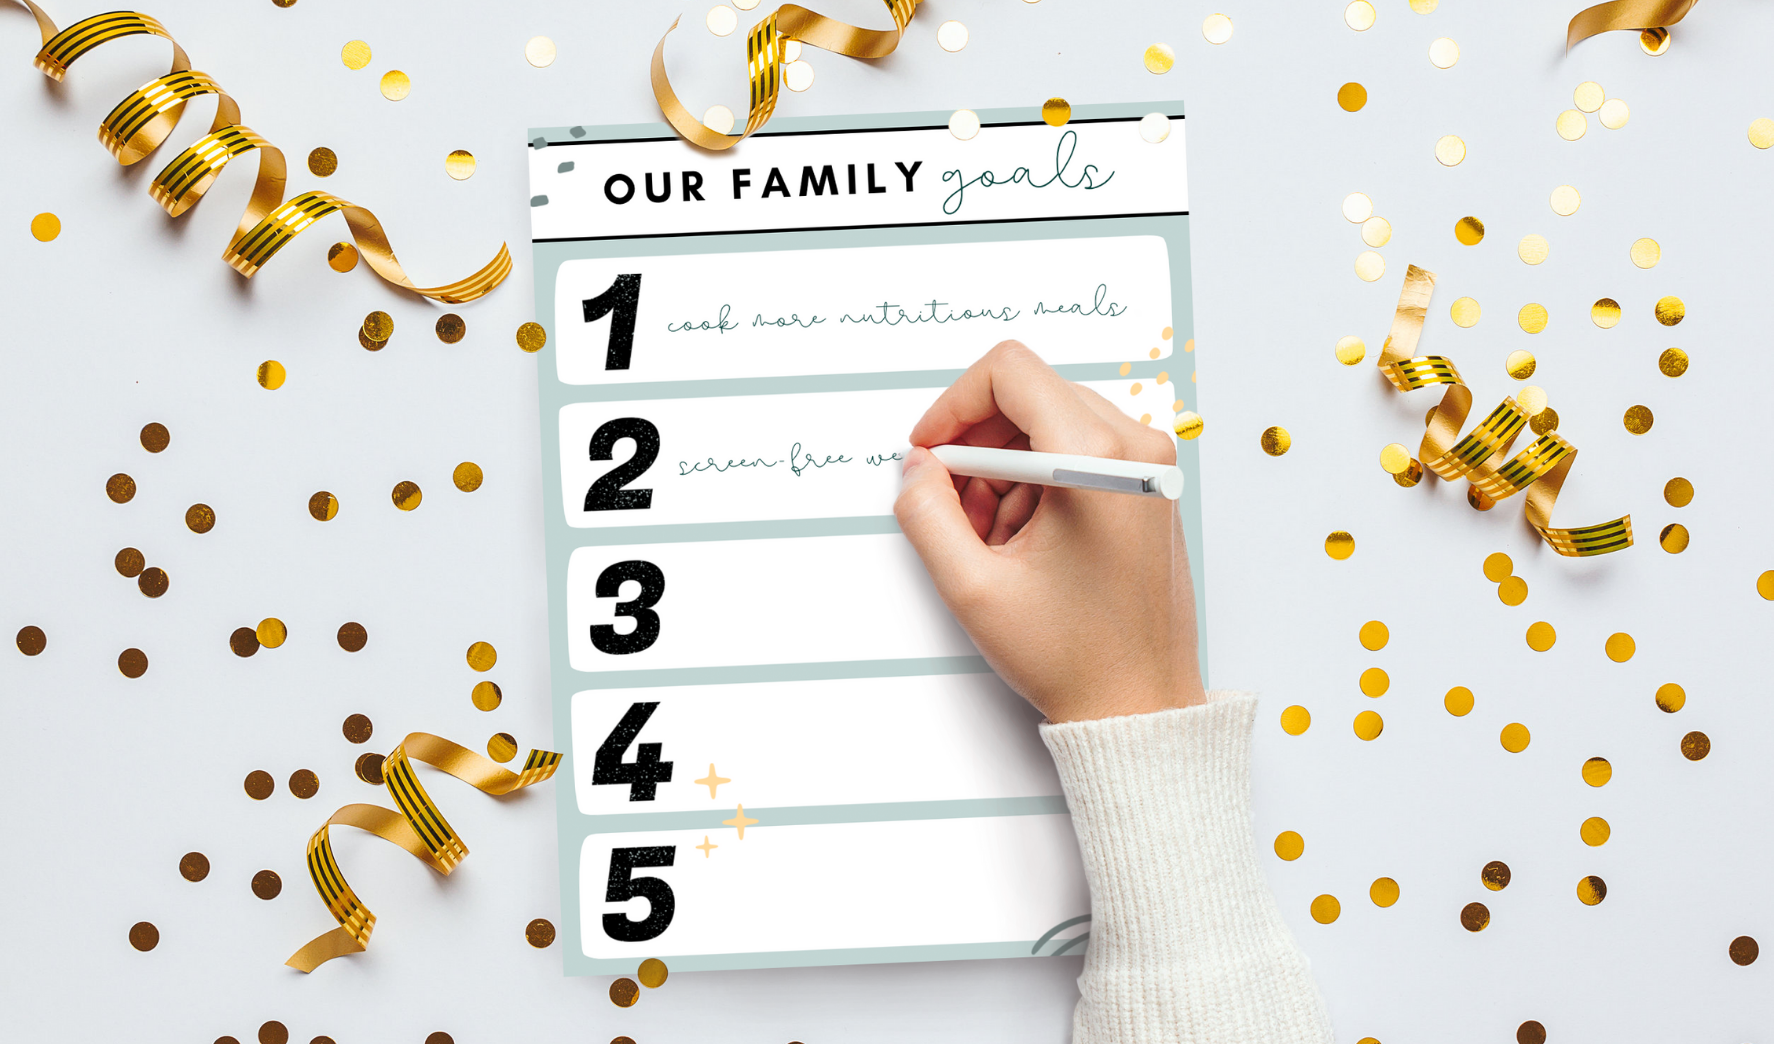 25 Family Goals Examples For The New Year (+ FREE Printable Goal Template)